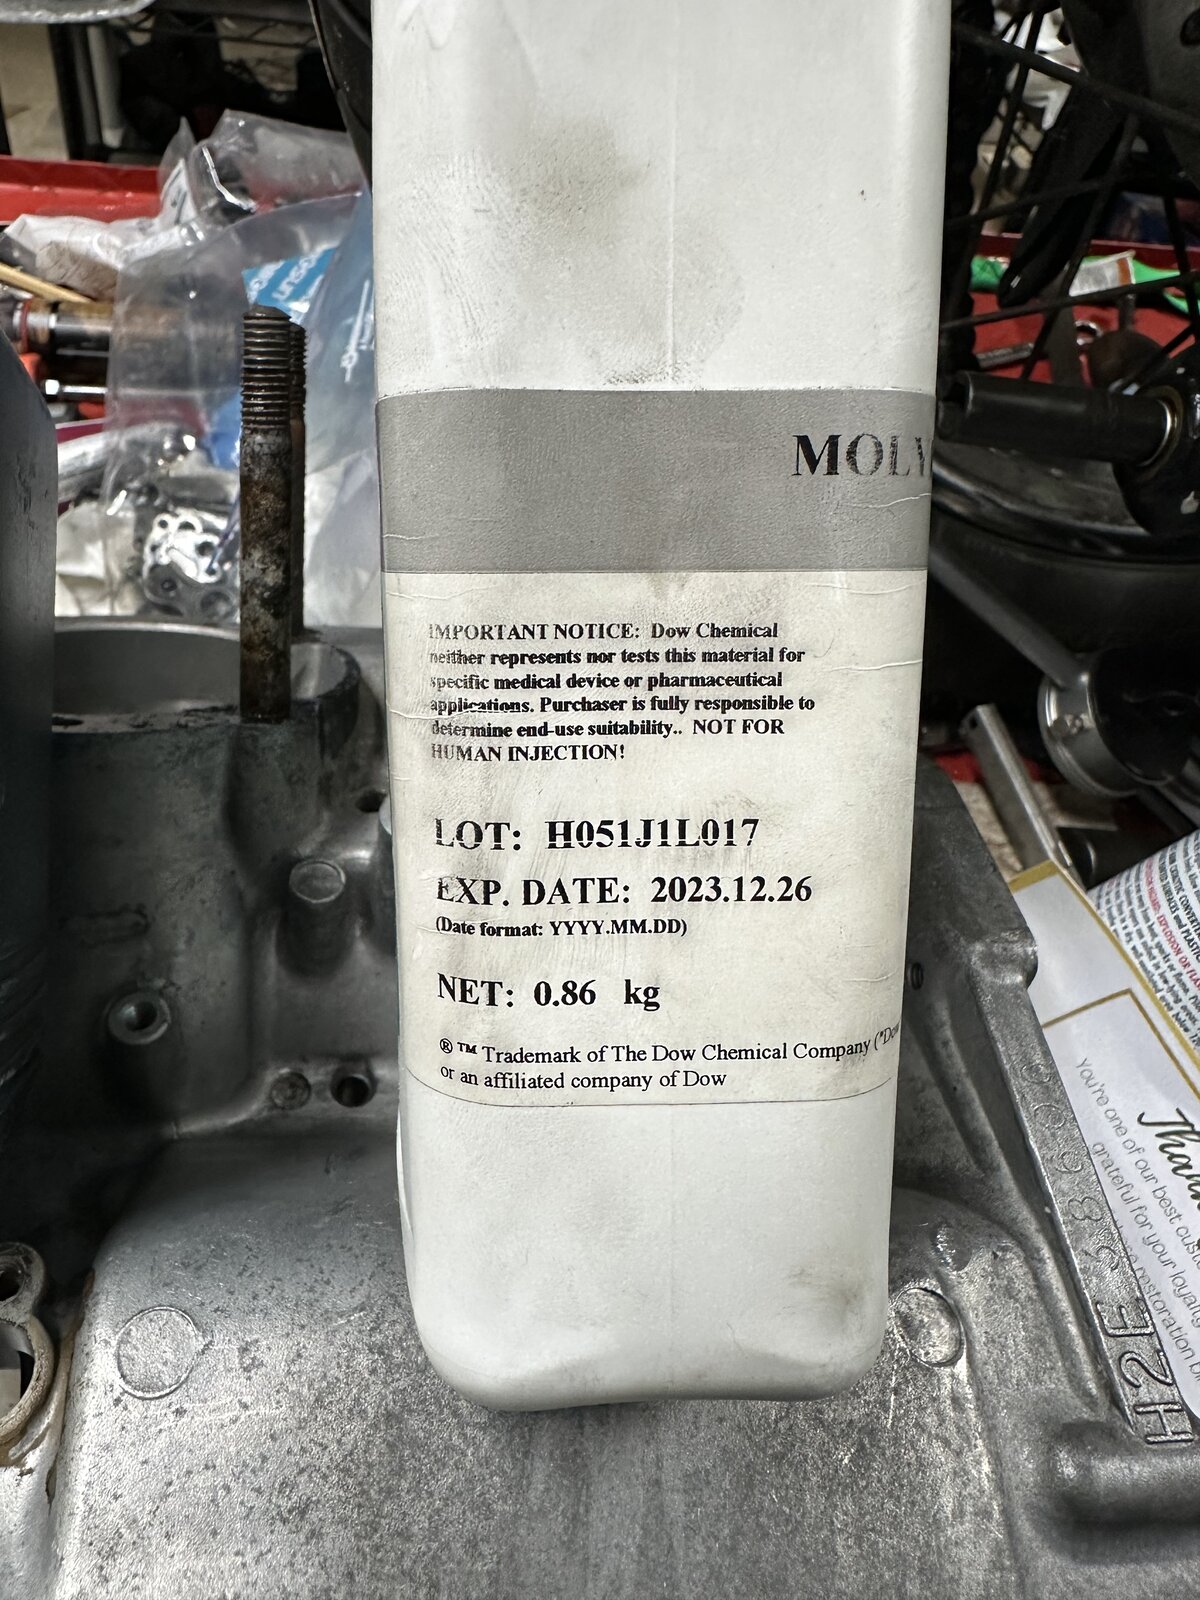 synthetic gearbox oils